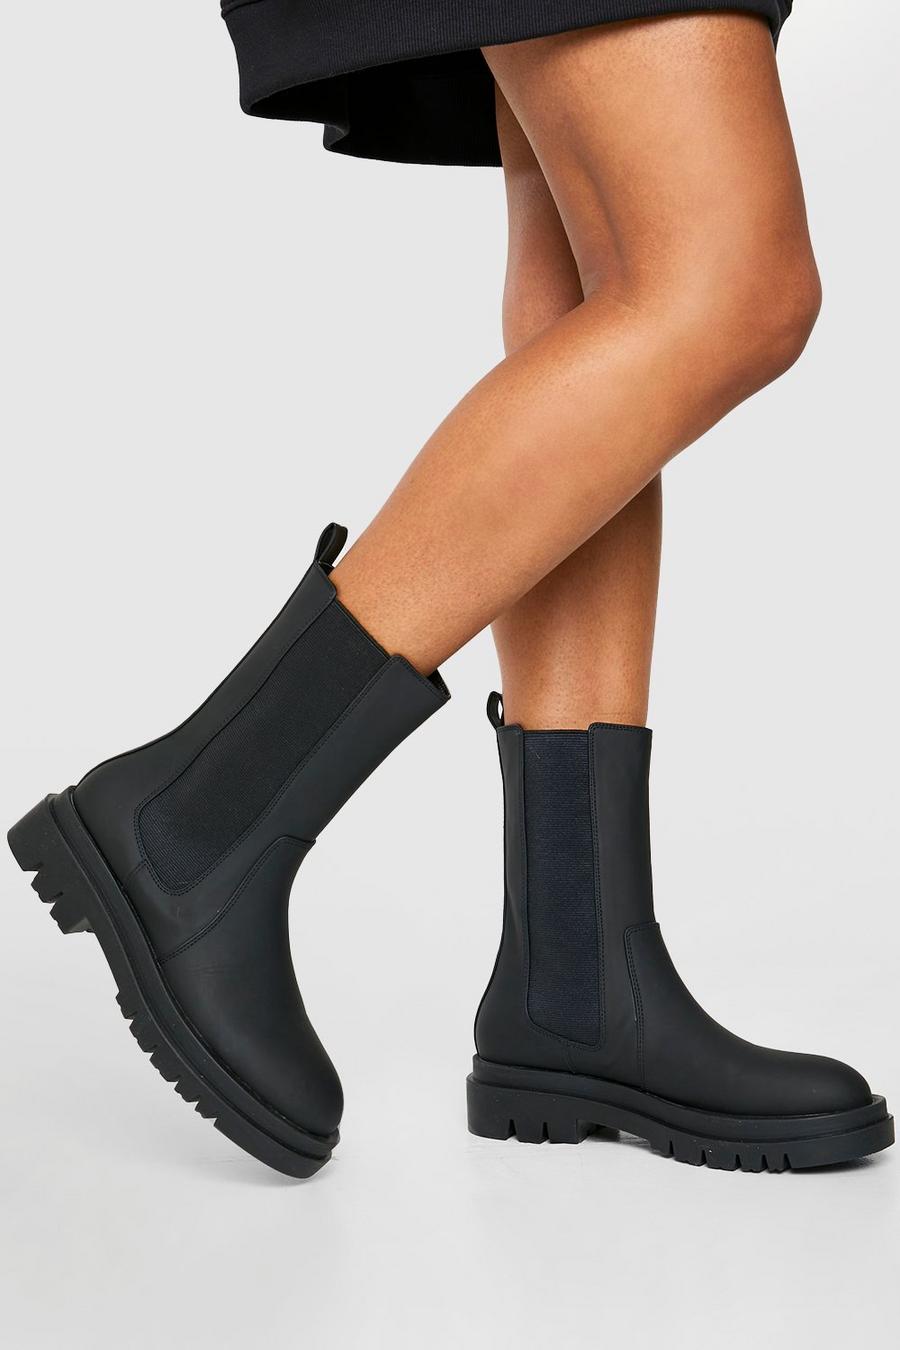 Black Rubber Calf High Chunky Sole Chelsea Boots